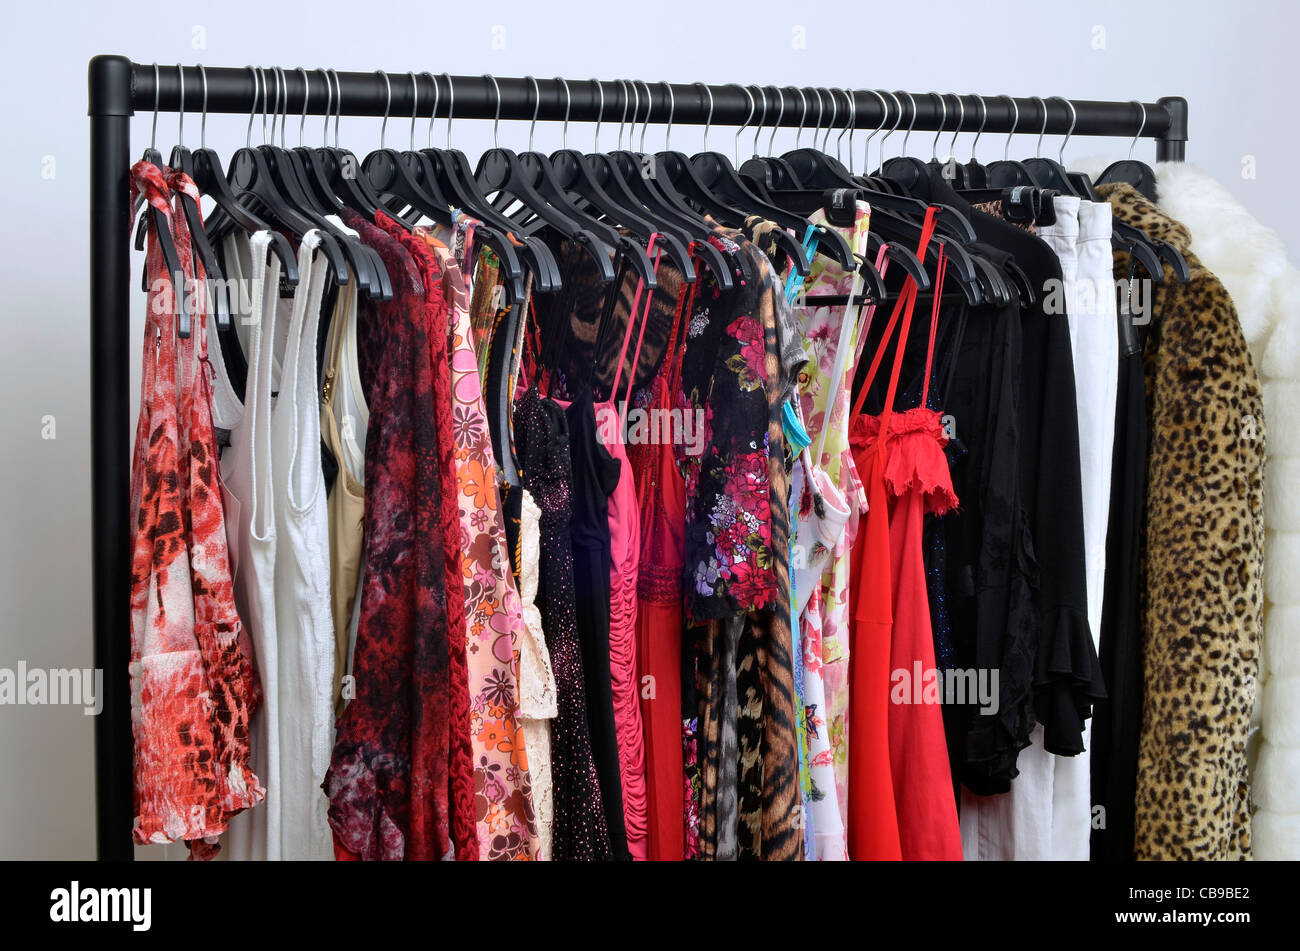 Clothes rail with contemporary young women's clothing from Topshop, Miss  Selfridge, River Island, New Look, Primark, Motel, etc Stock Photo - Alamy